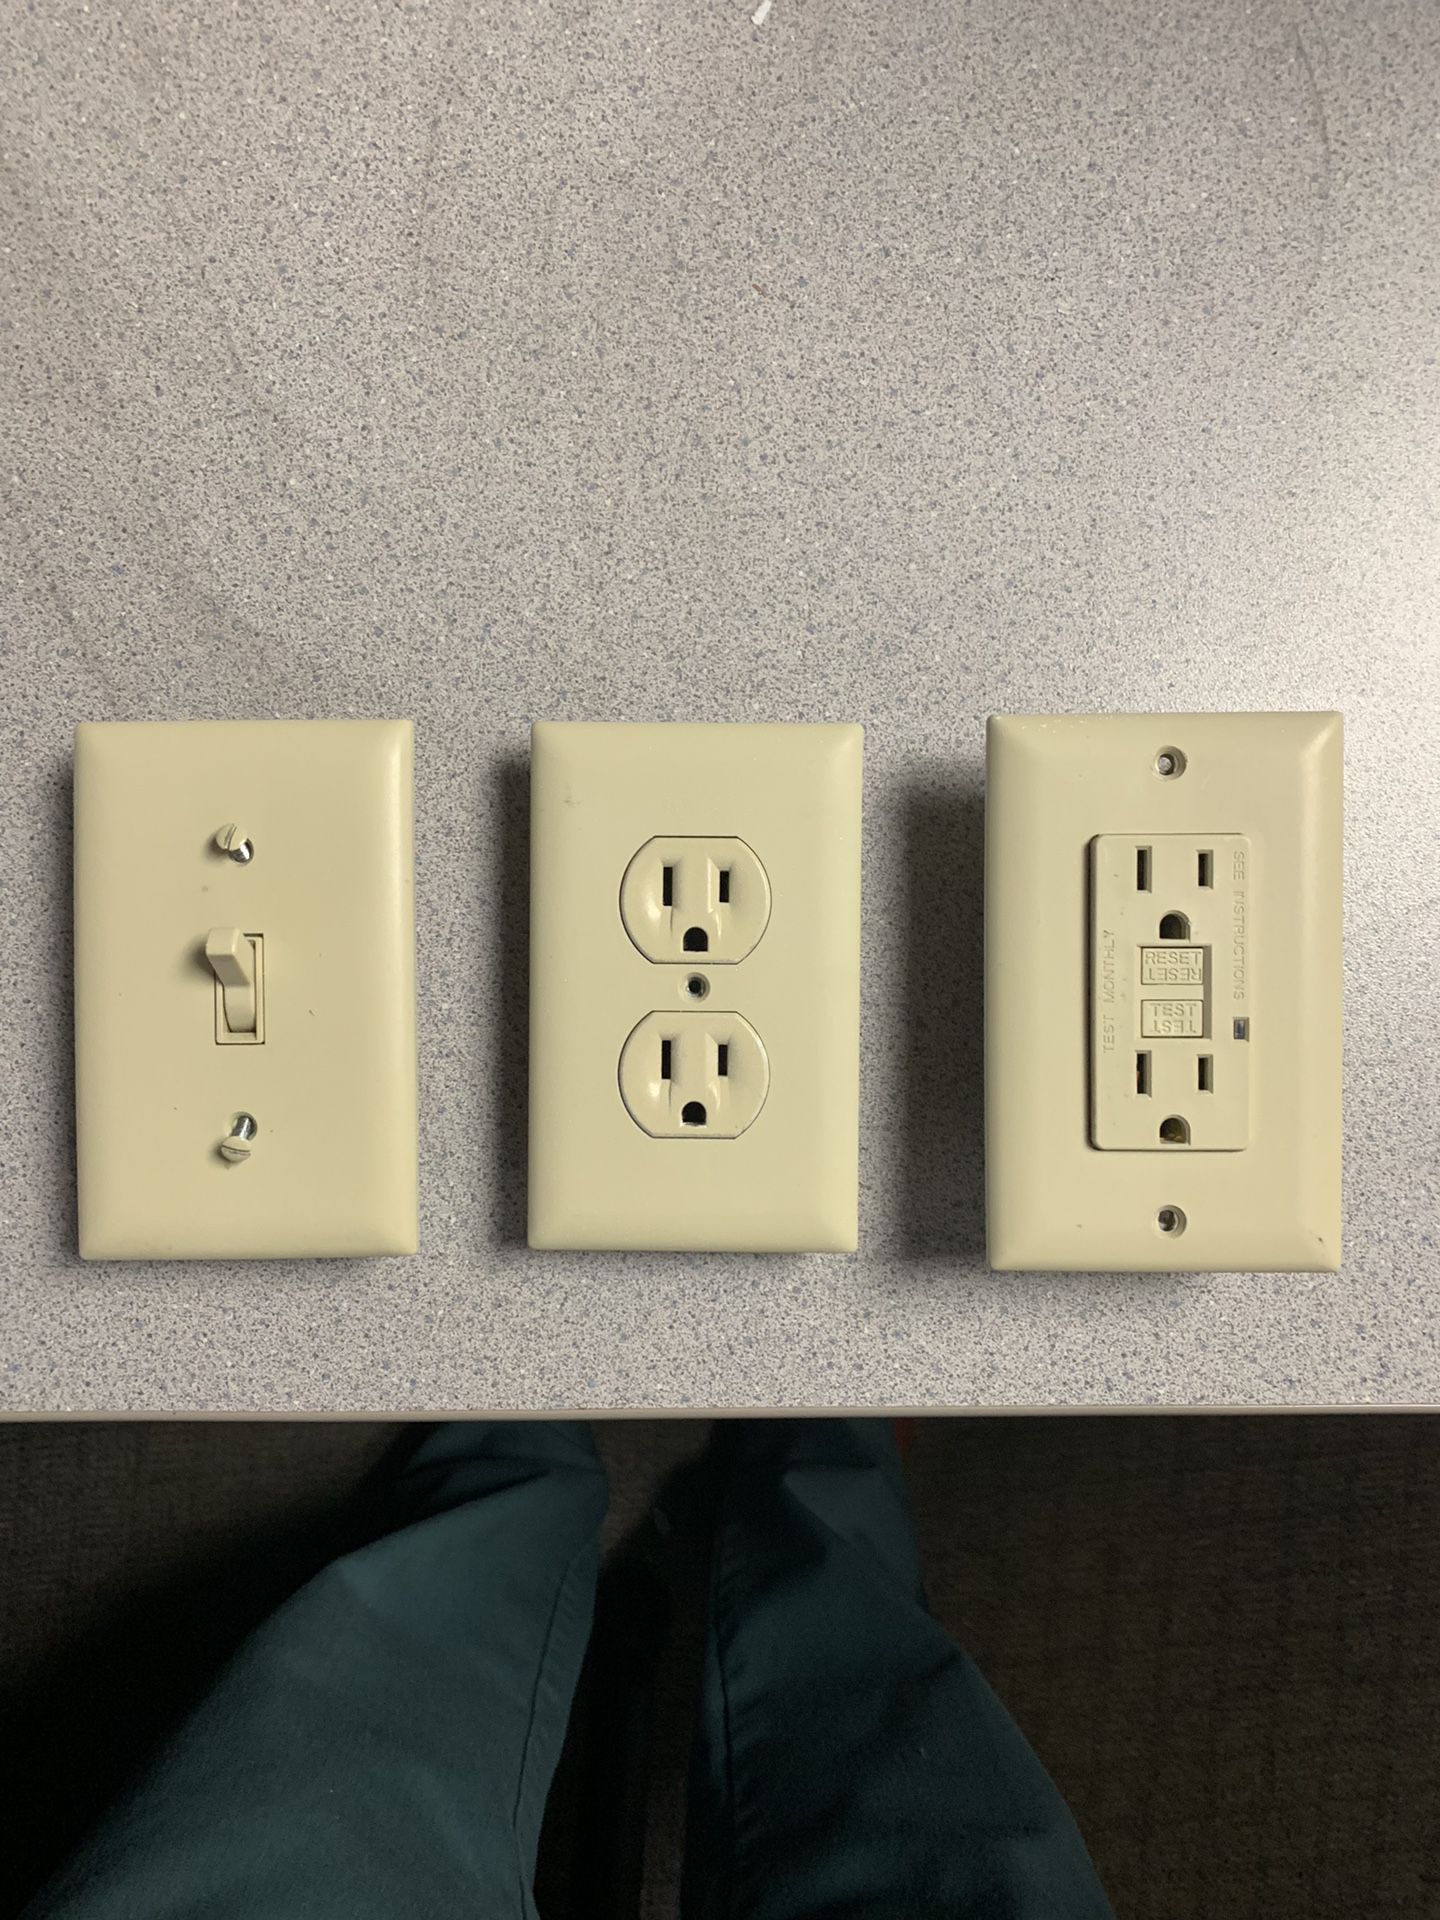 Light switches and Receptacles